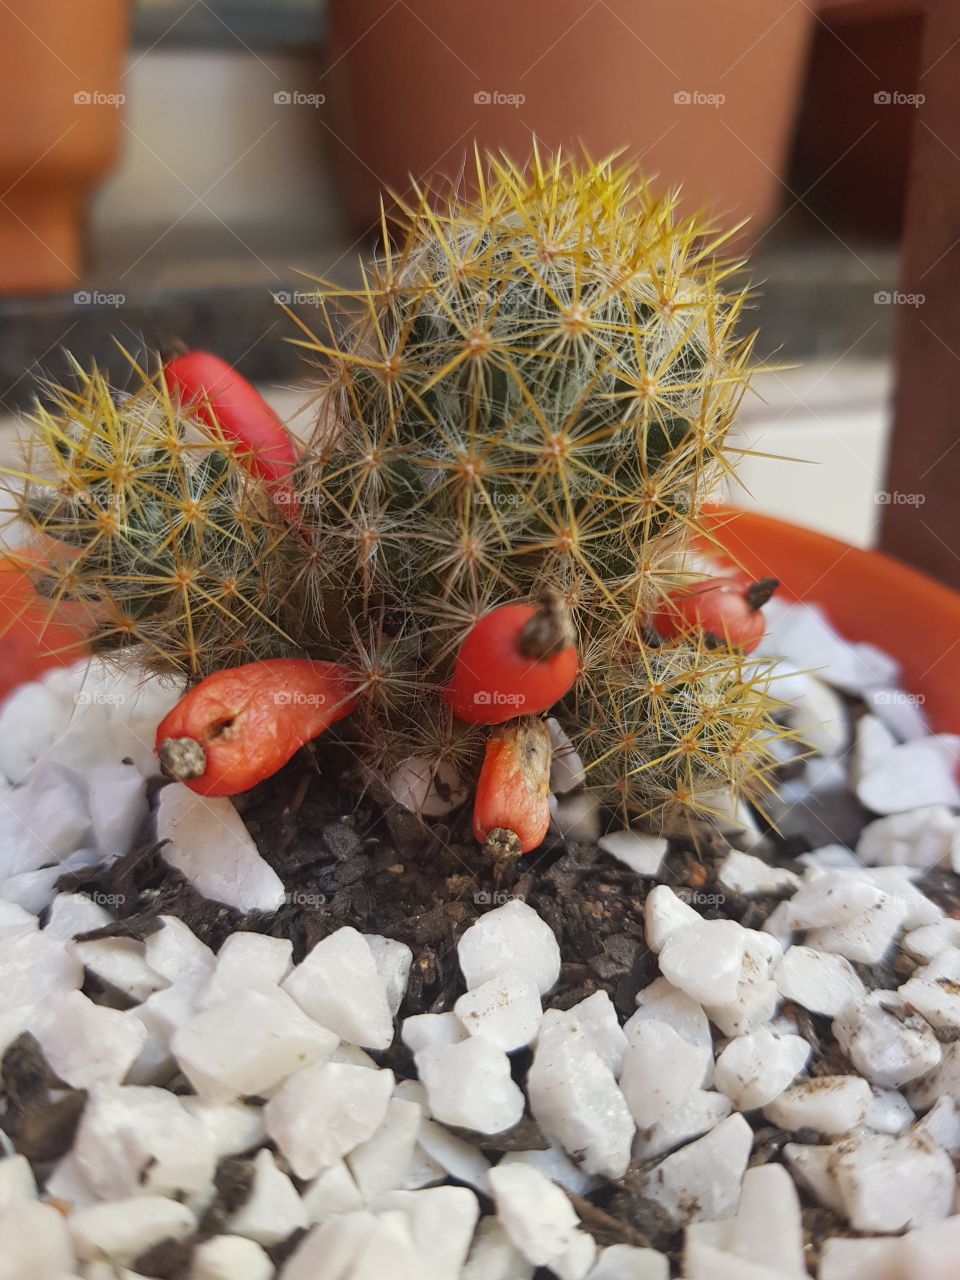 Plants Lovers - Cactos and Suculentas